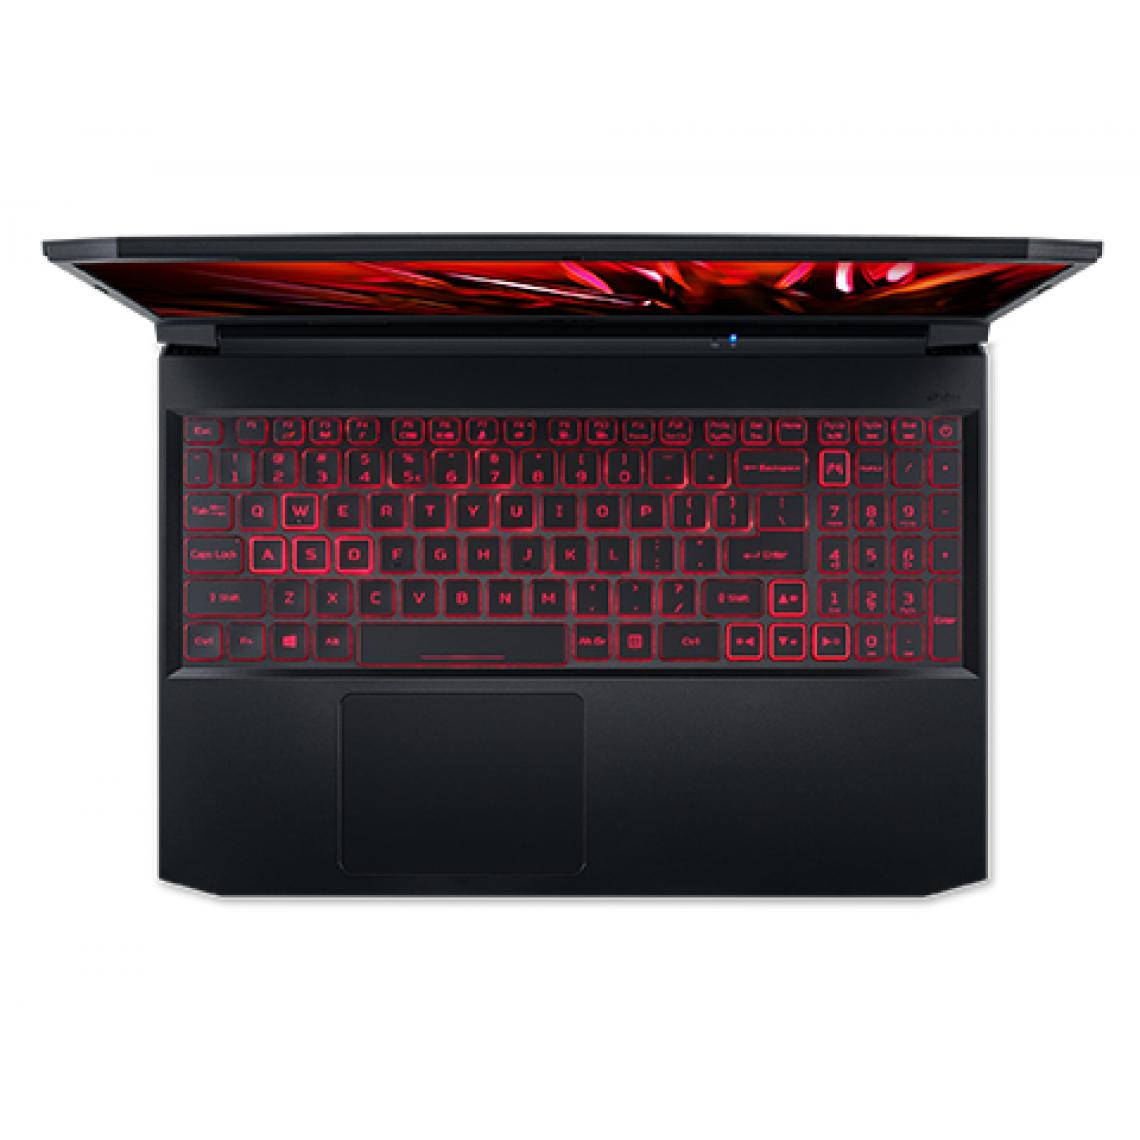 Acer - Nitro 5 AN515-57-58DS/ 15.6'' FHD IPS (1920 x 1080) - PC Portable Gamer